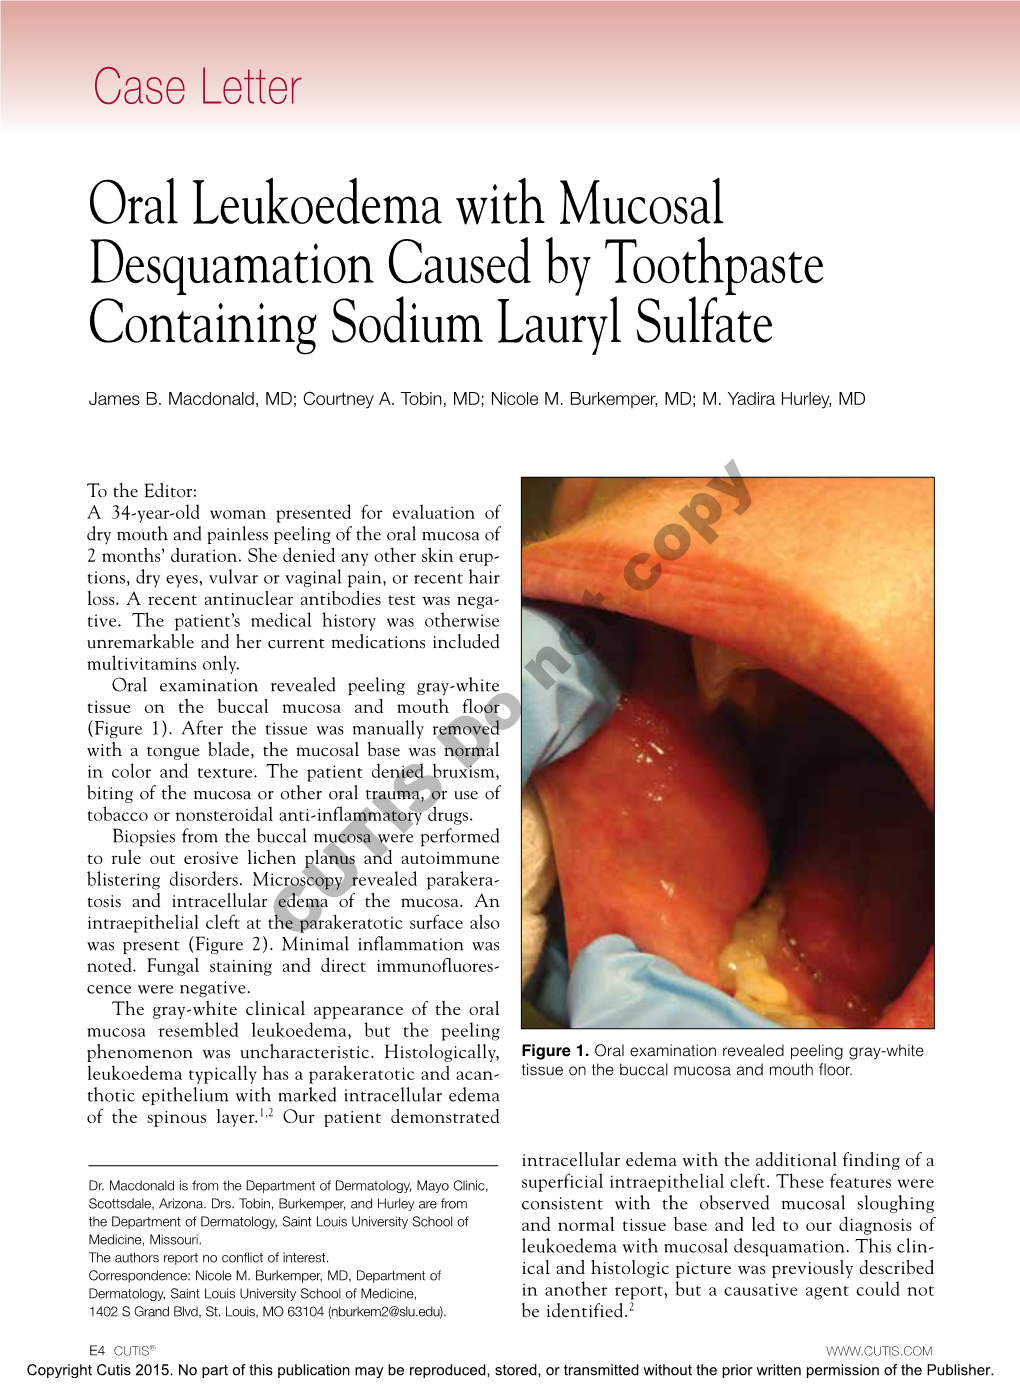 Oral Leukoedema with Mucosal Desquamation Caused by Toothpaste Containing Sodium Lauryl Sulfate